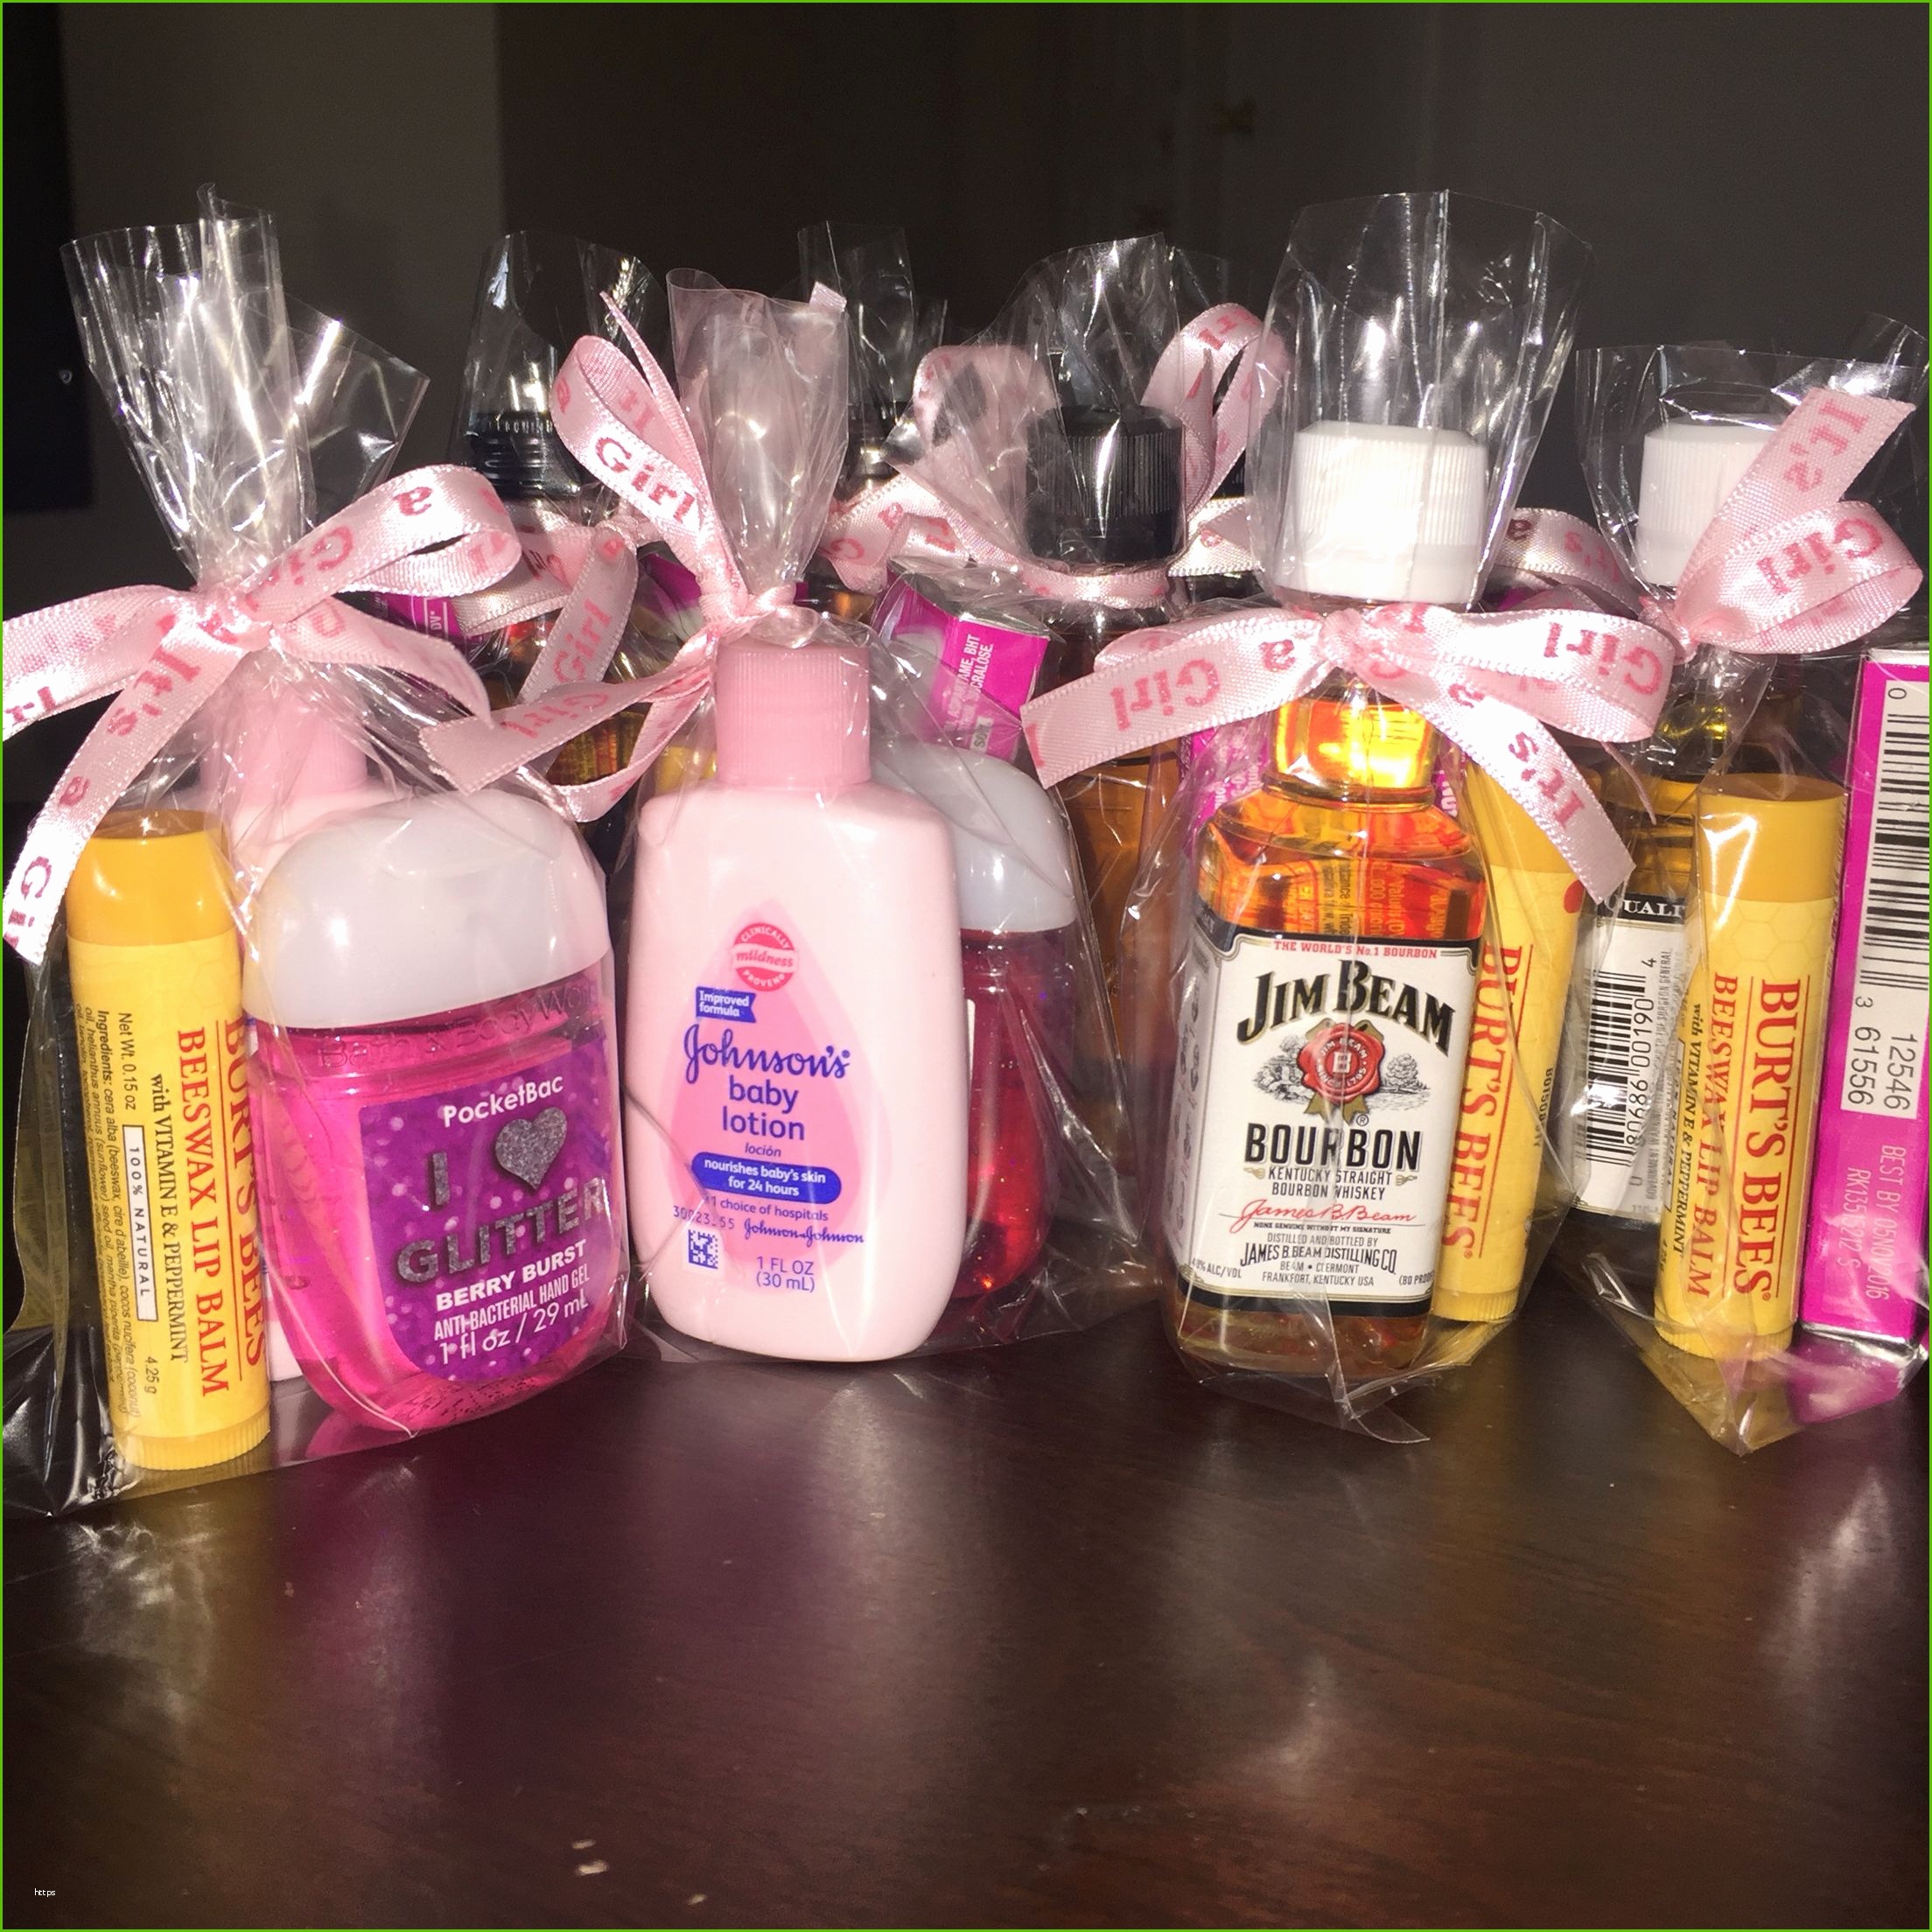 Full Size of Baby Shower:enamour Baby Shower Gifts For Guests Picture Ideas Baby Shower Gifts For Guests As Well As Baby Shower Word Search With Arreglos Baby Shower Niño Plus Baby Shower At The Park Together With Throwing A Baby Shower